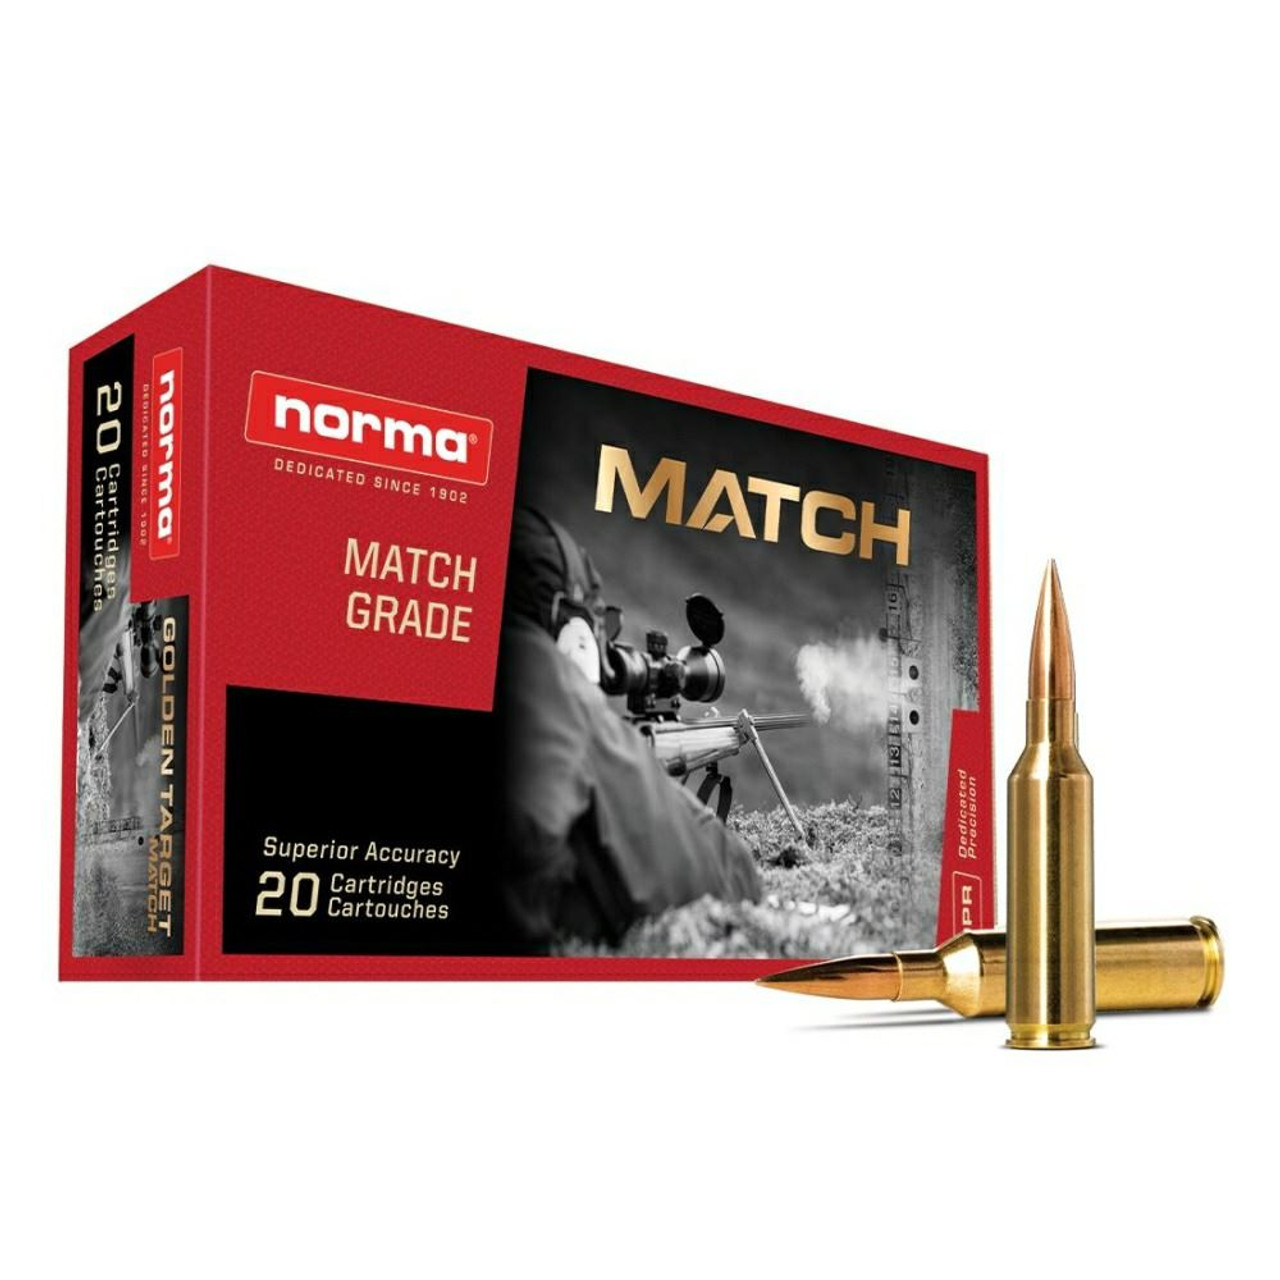 Ammo Norma Golden Target 143gr 6.5 CR 20 rounds